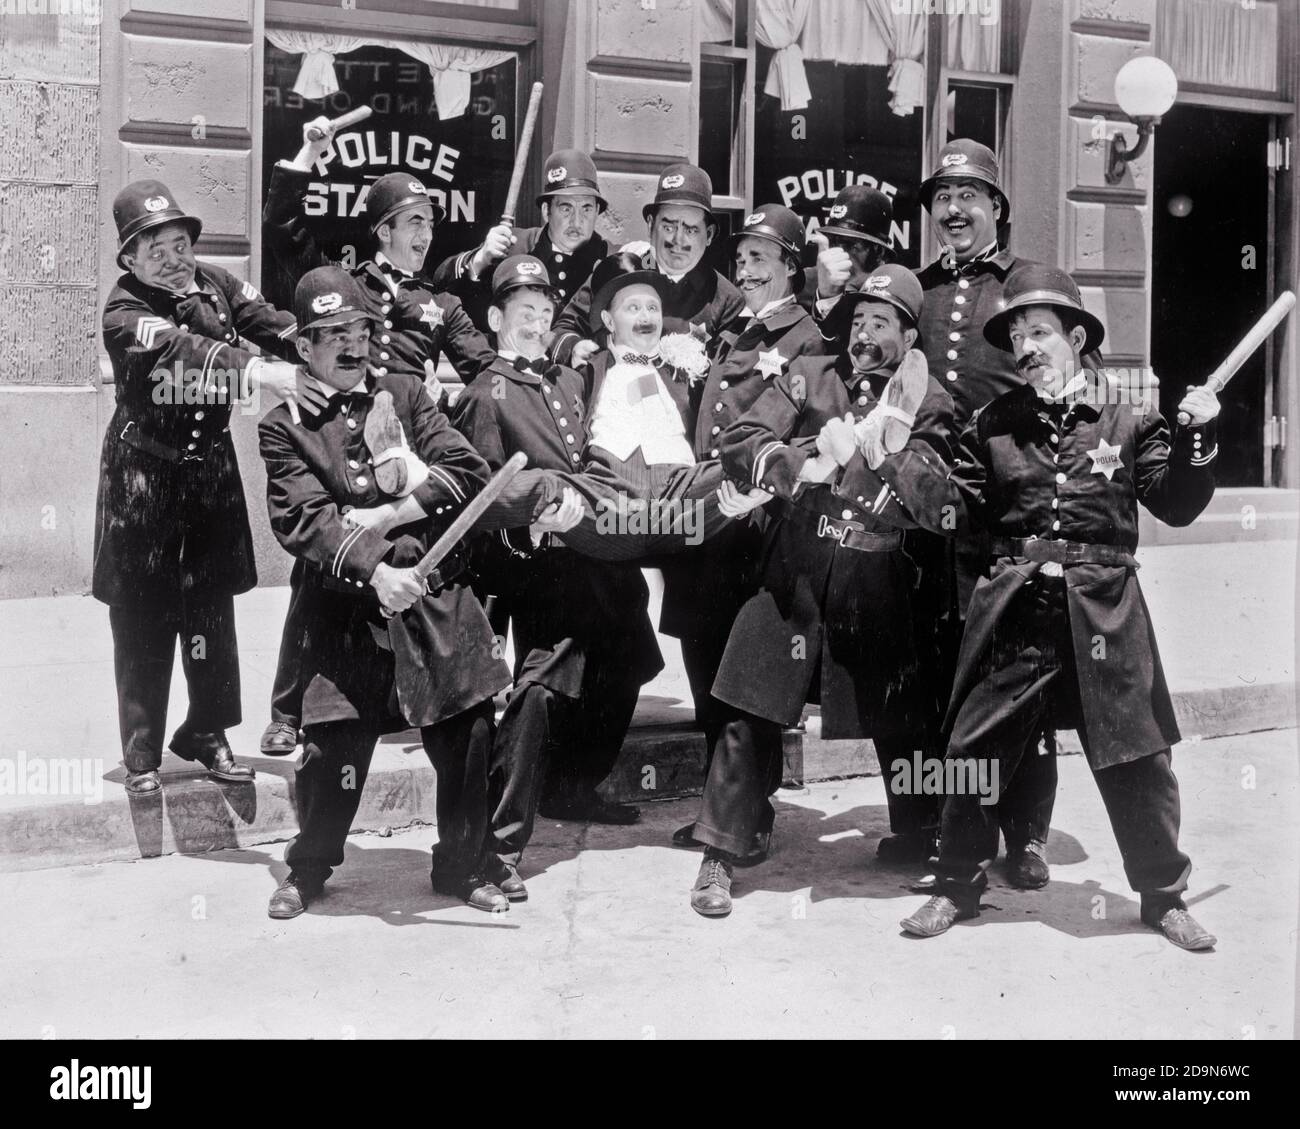 1910s 1912-1917 KEYSTONE COPS AND BEN TURPIN MACK SENNETT HOLLYWOOD SLAPSTICK COMEDY SILENT MOVIE STILL  - h9864 NAW001 HARS PROTECT SKILLS PERFORMER AND CAREERS EXCITEMENT COMICAL ENTERTAINER KEYSTONE OCCUPATIONS UNIFORMS BEN ACTORS COMEDY SILENT MOVIE SLAPSTICK MOTION PICTURE OFFICERS POLICEMEN PUBLICITY STILL COPS ENTERTAINERS FICTIONAL INCOMPETENT MACK MOVIE STILL PERFORMERS SILENT FILM BADGE BADGES BEN TURPIN BLACK AND WHITE CAUCASIAN ETHNICITY MACK SENNETT OLD FASHIONED Stock Photo